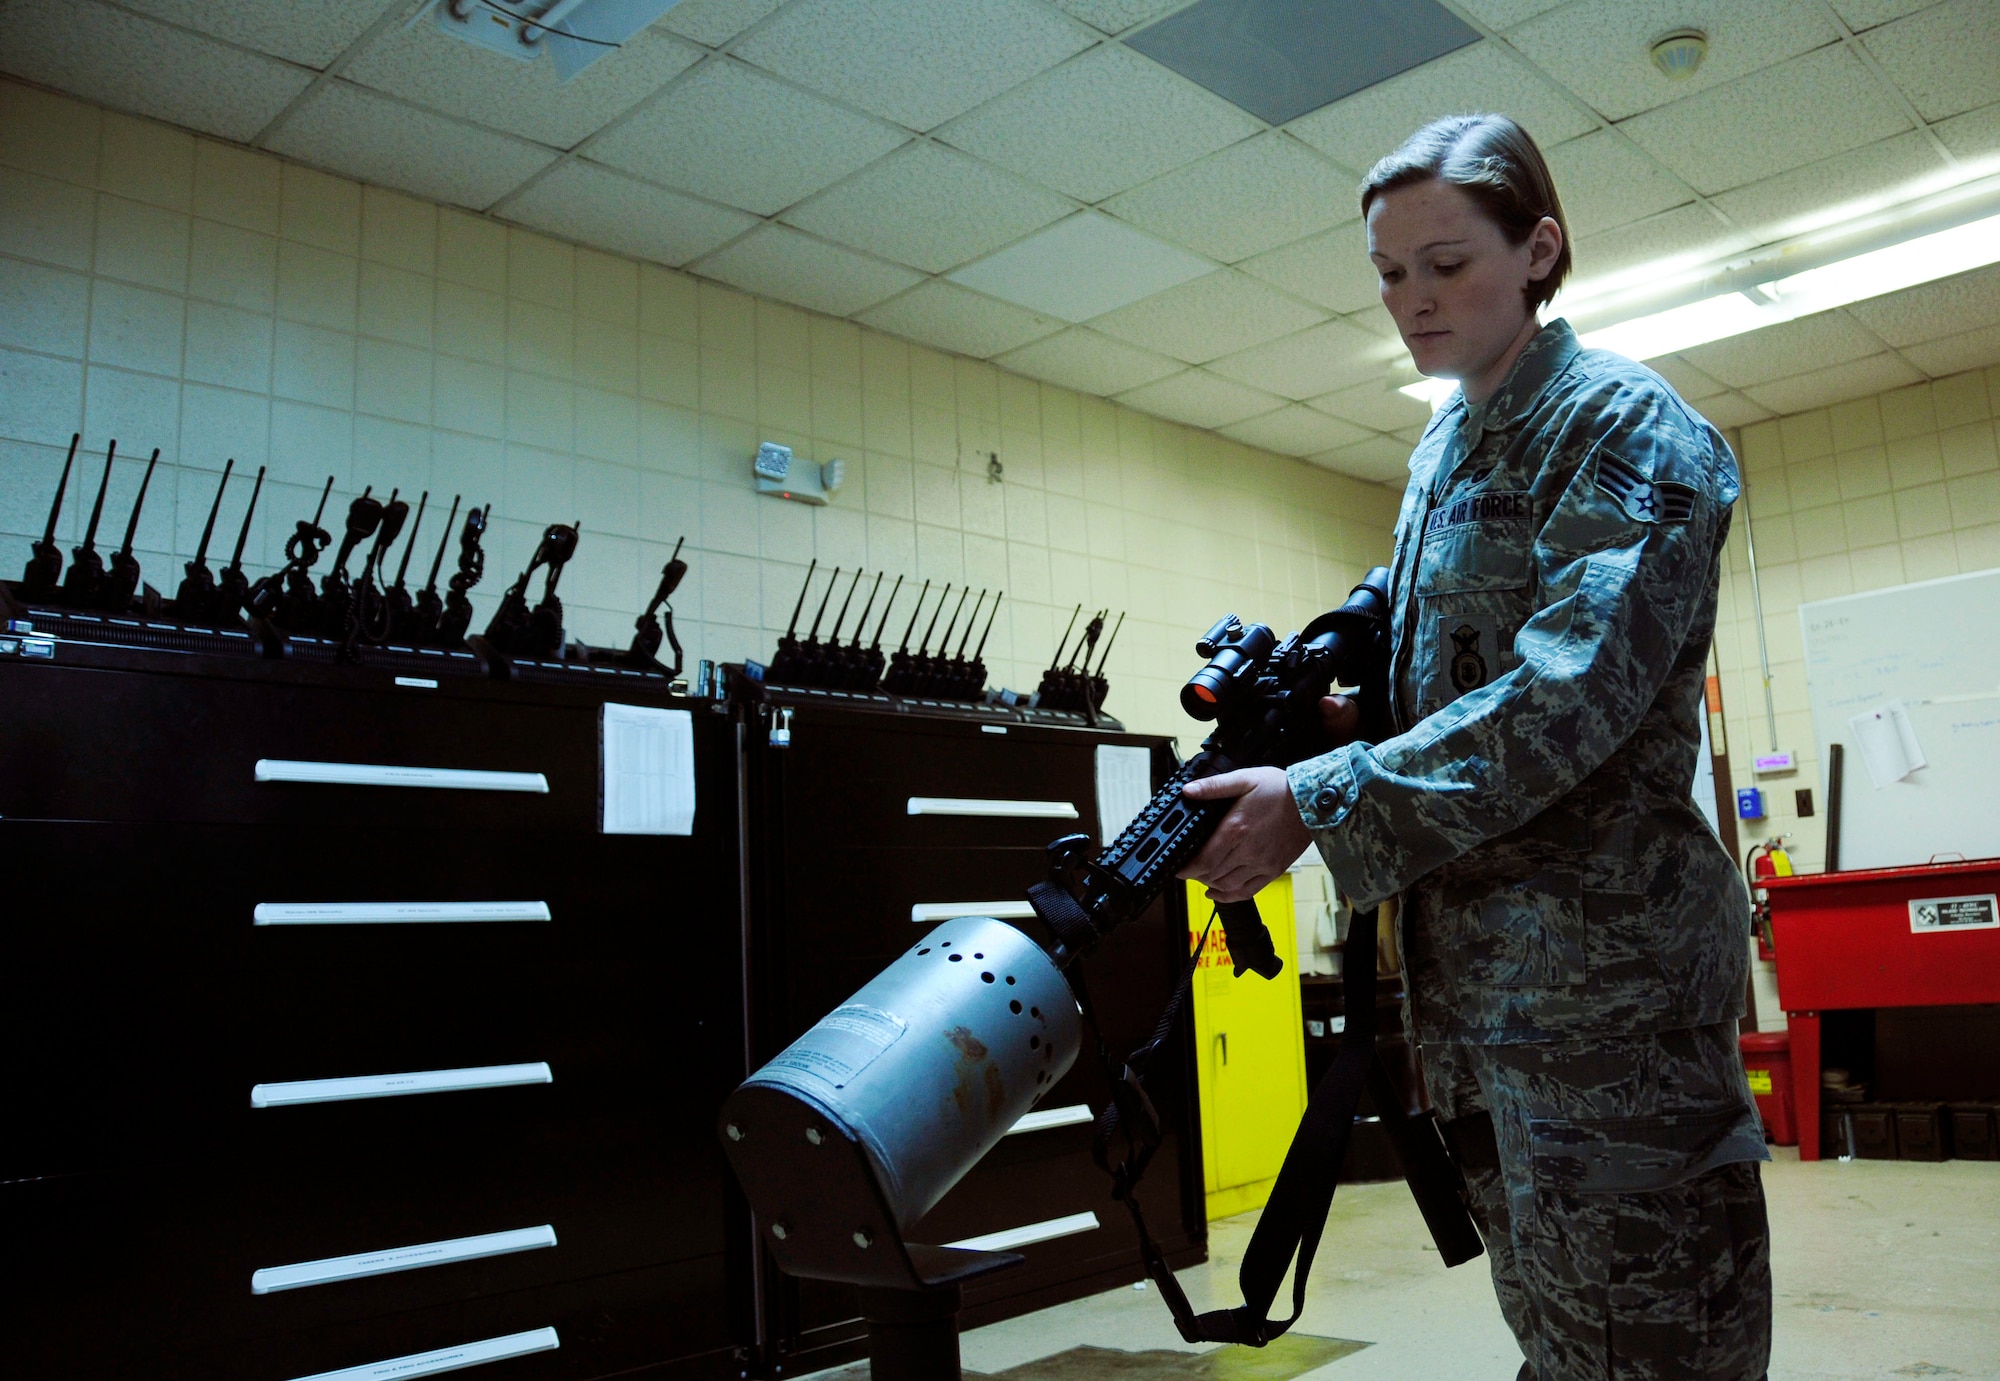 U.S. Air Force Senior Airman Kristine Koch, 145th Security Forces Squadron, safely utilizes a clearing barrel before issuing an M4 rifle during unit training at the North Carolina Air National Guard base, Charlotte Douglas Intl. Airport, Mar 21, 2015. Koch, who completed her first Professional Military Education milestone, Feb 12, 2015, as a distinguished graduate from Airman Leadership School has been with 145th SFS since Oct 2012. (U.S. Air National Guard photo by Master Sgt. Patricia F. Moran, 145th Public Affairs/Released)